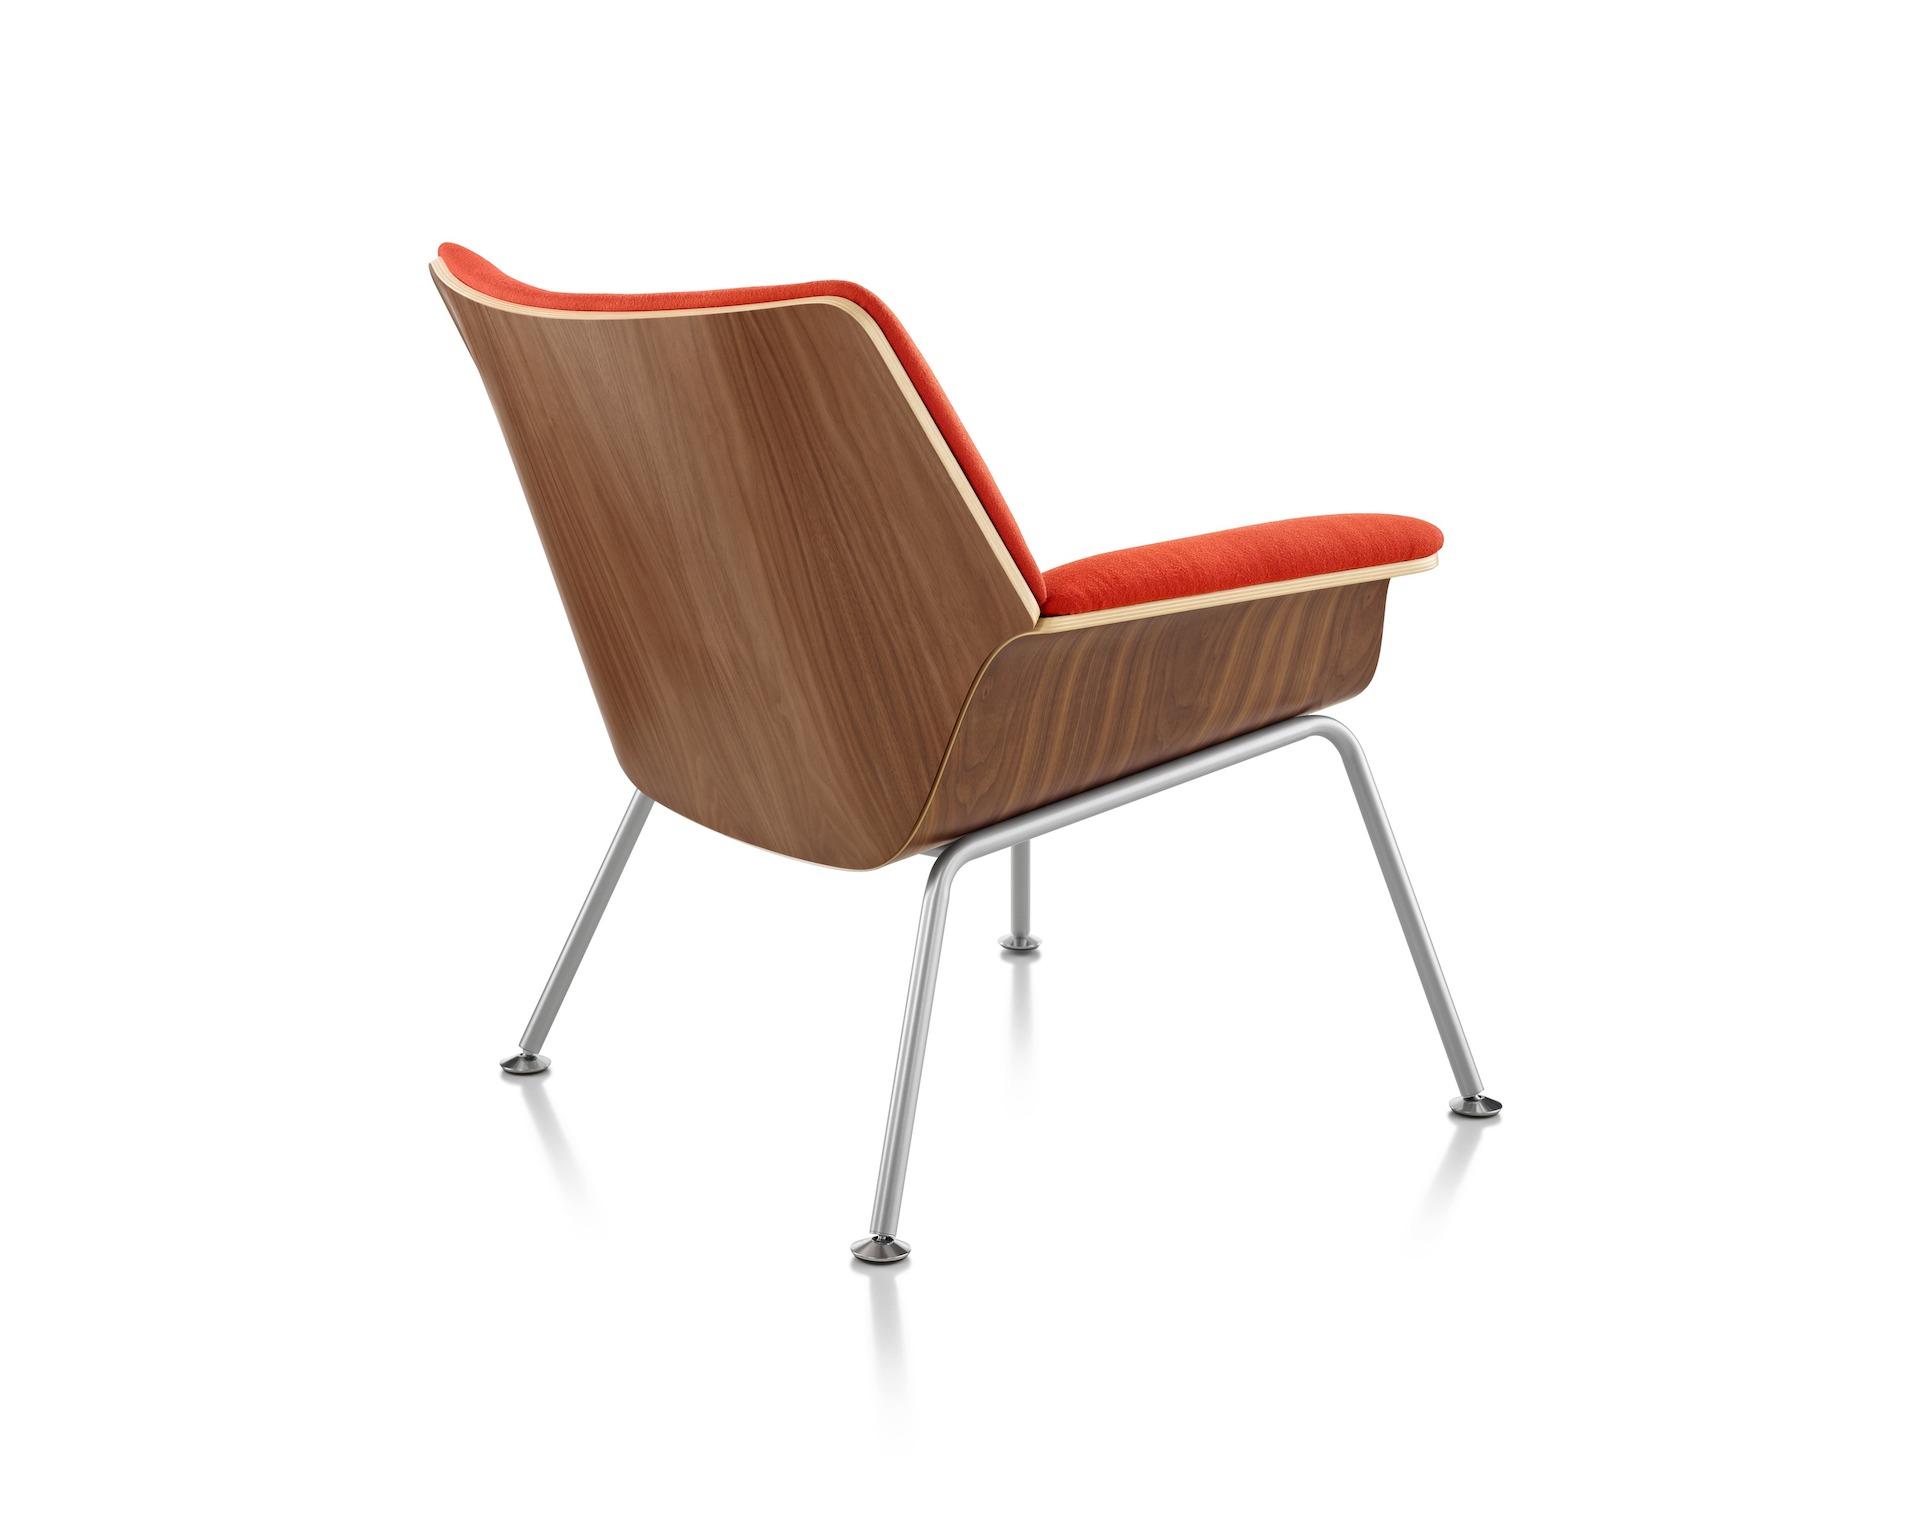 Swoop Plywood Lounge Chair